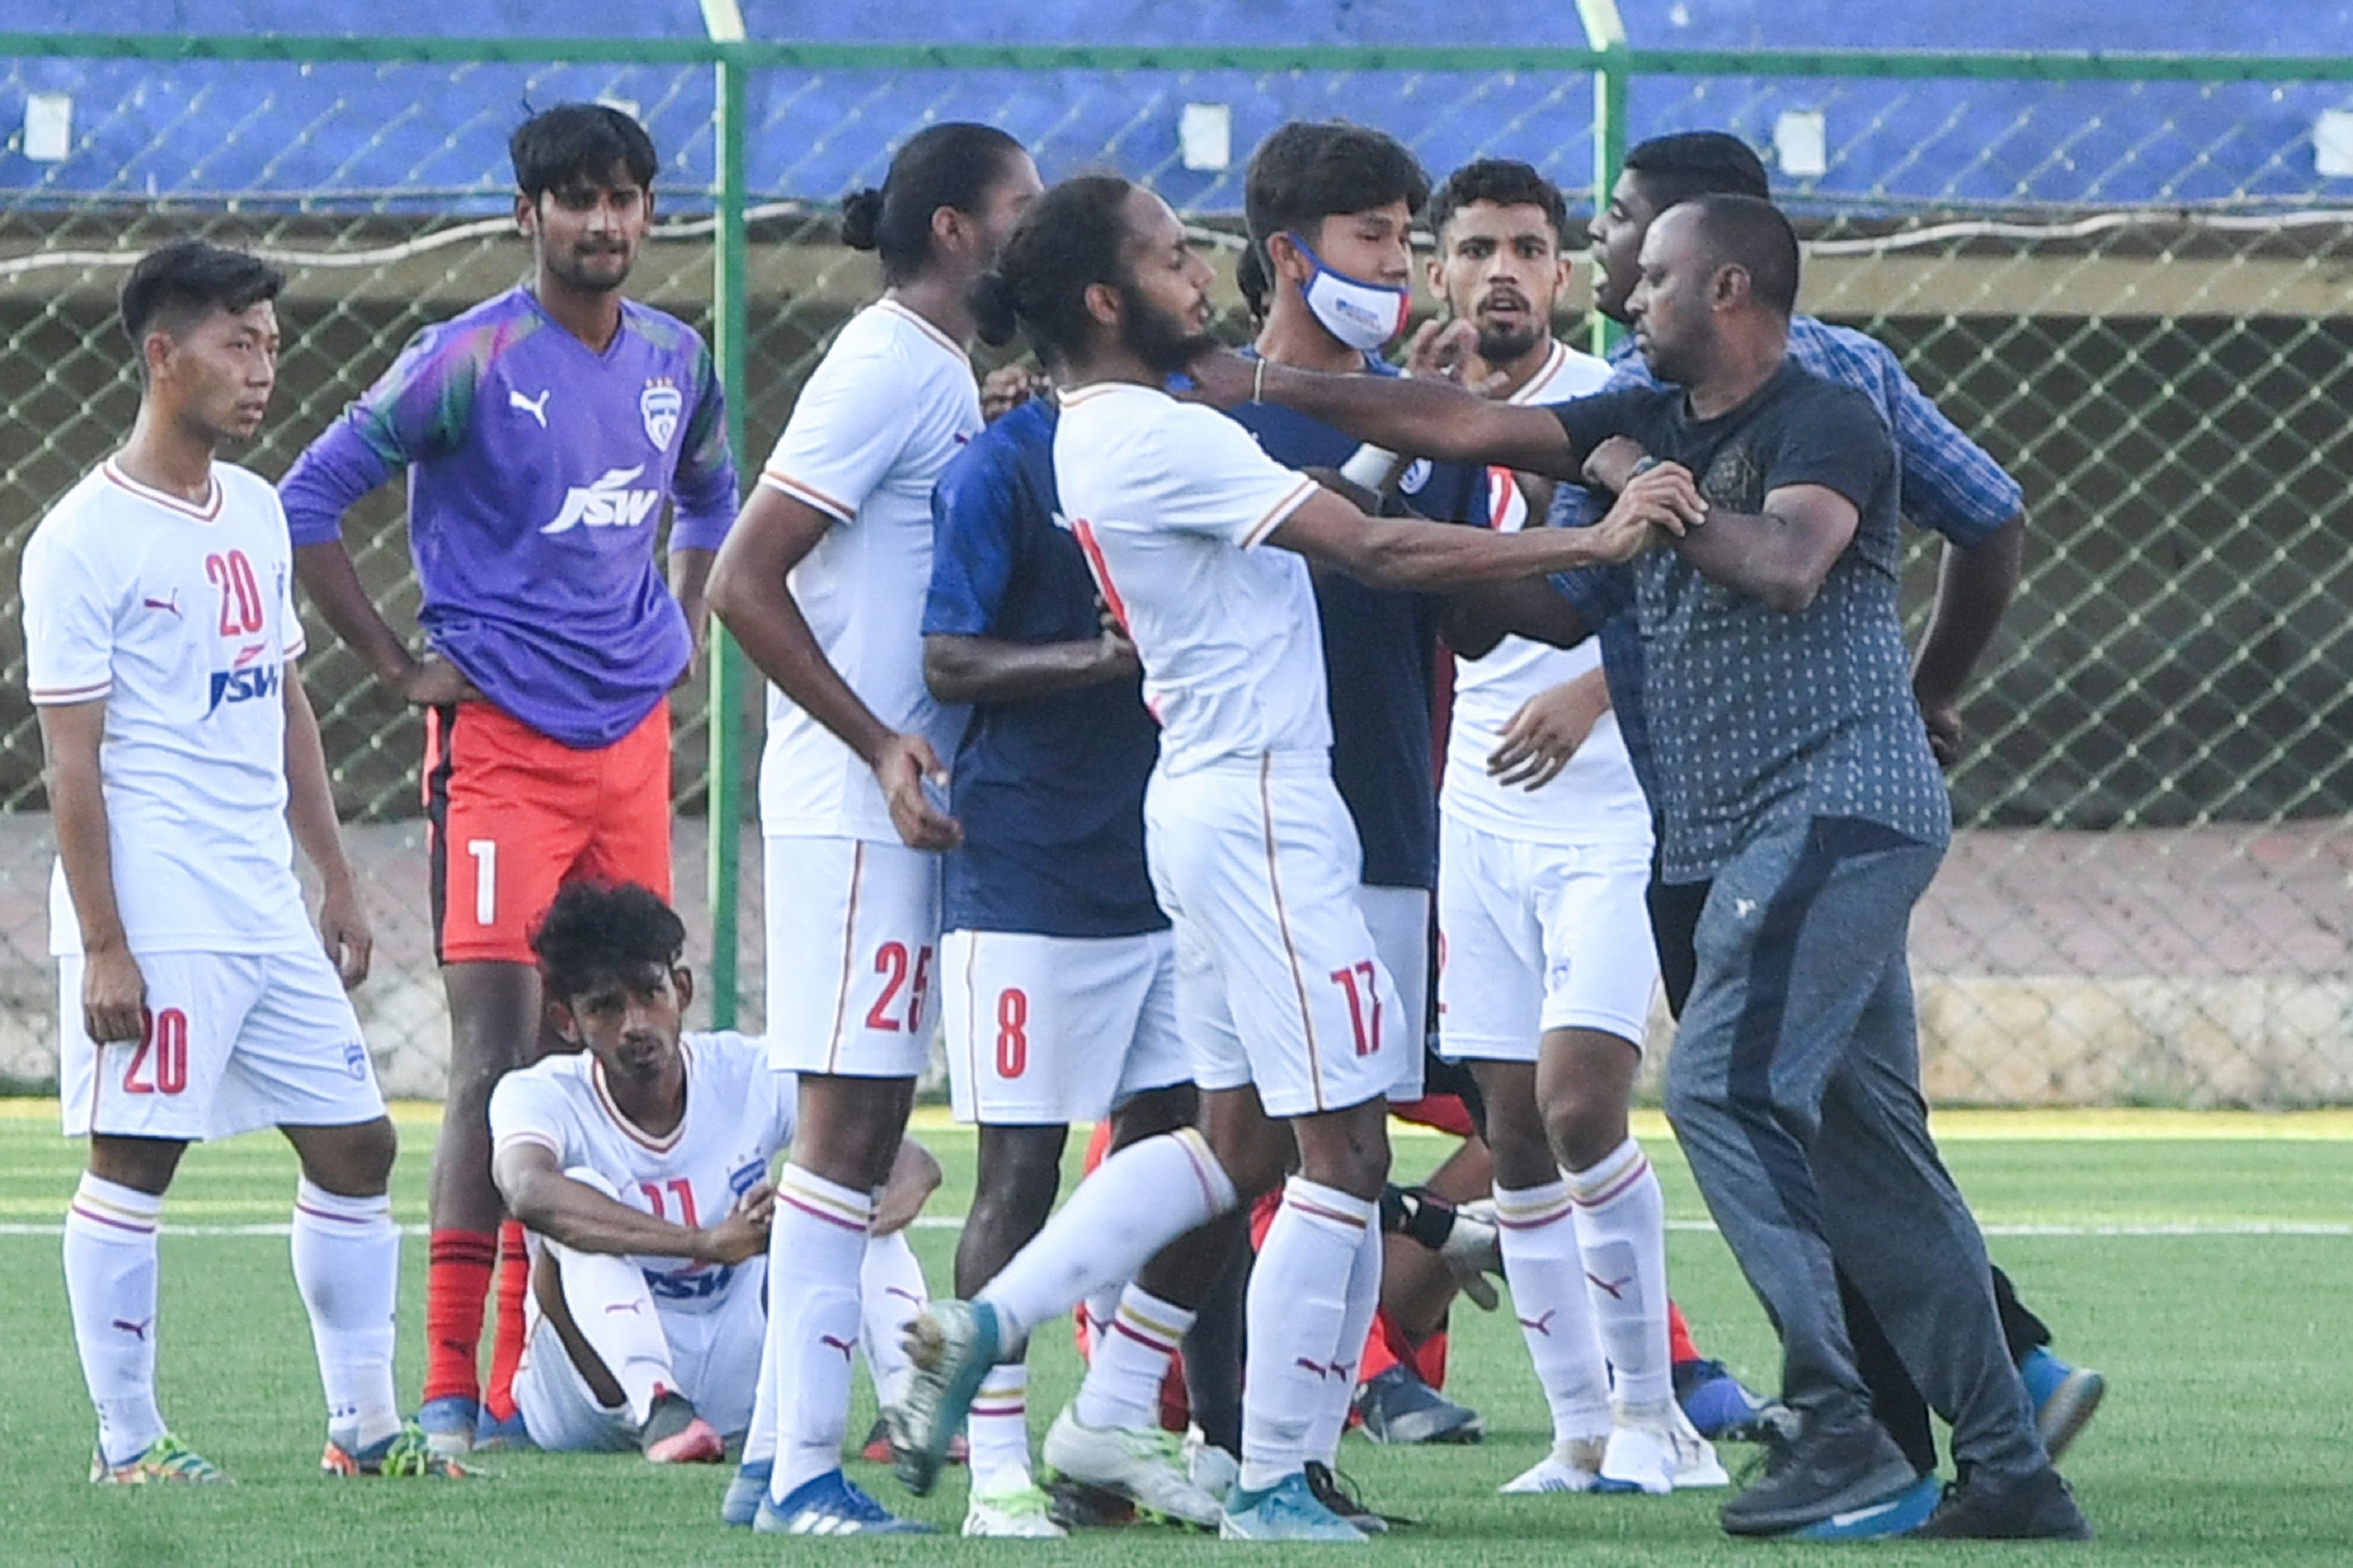 Bengaluru FC was given fines and bans by the Disciplinary Committee following the altercation following a BDFA Super Division match on Monday. Credit: DH photo. 